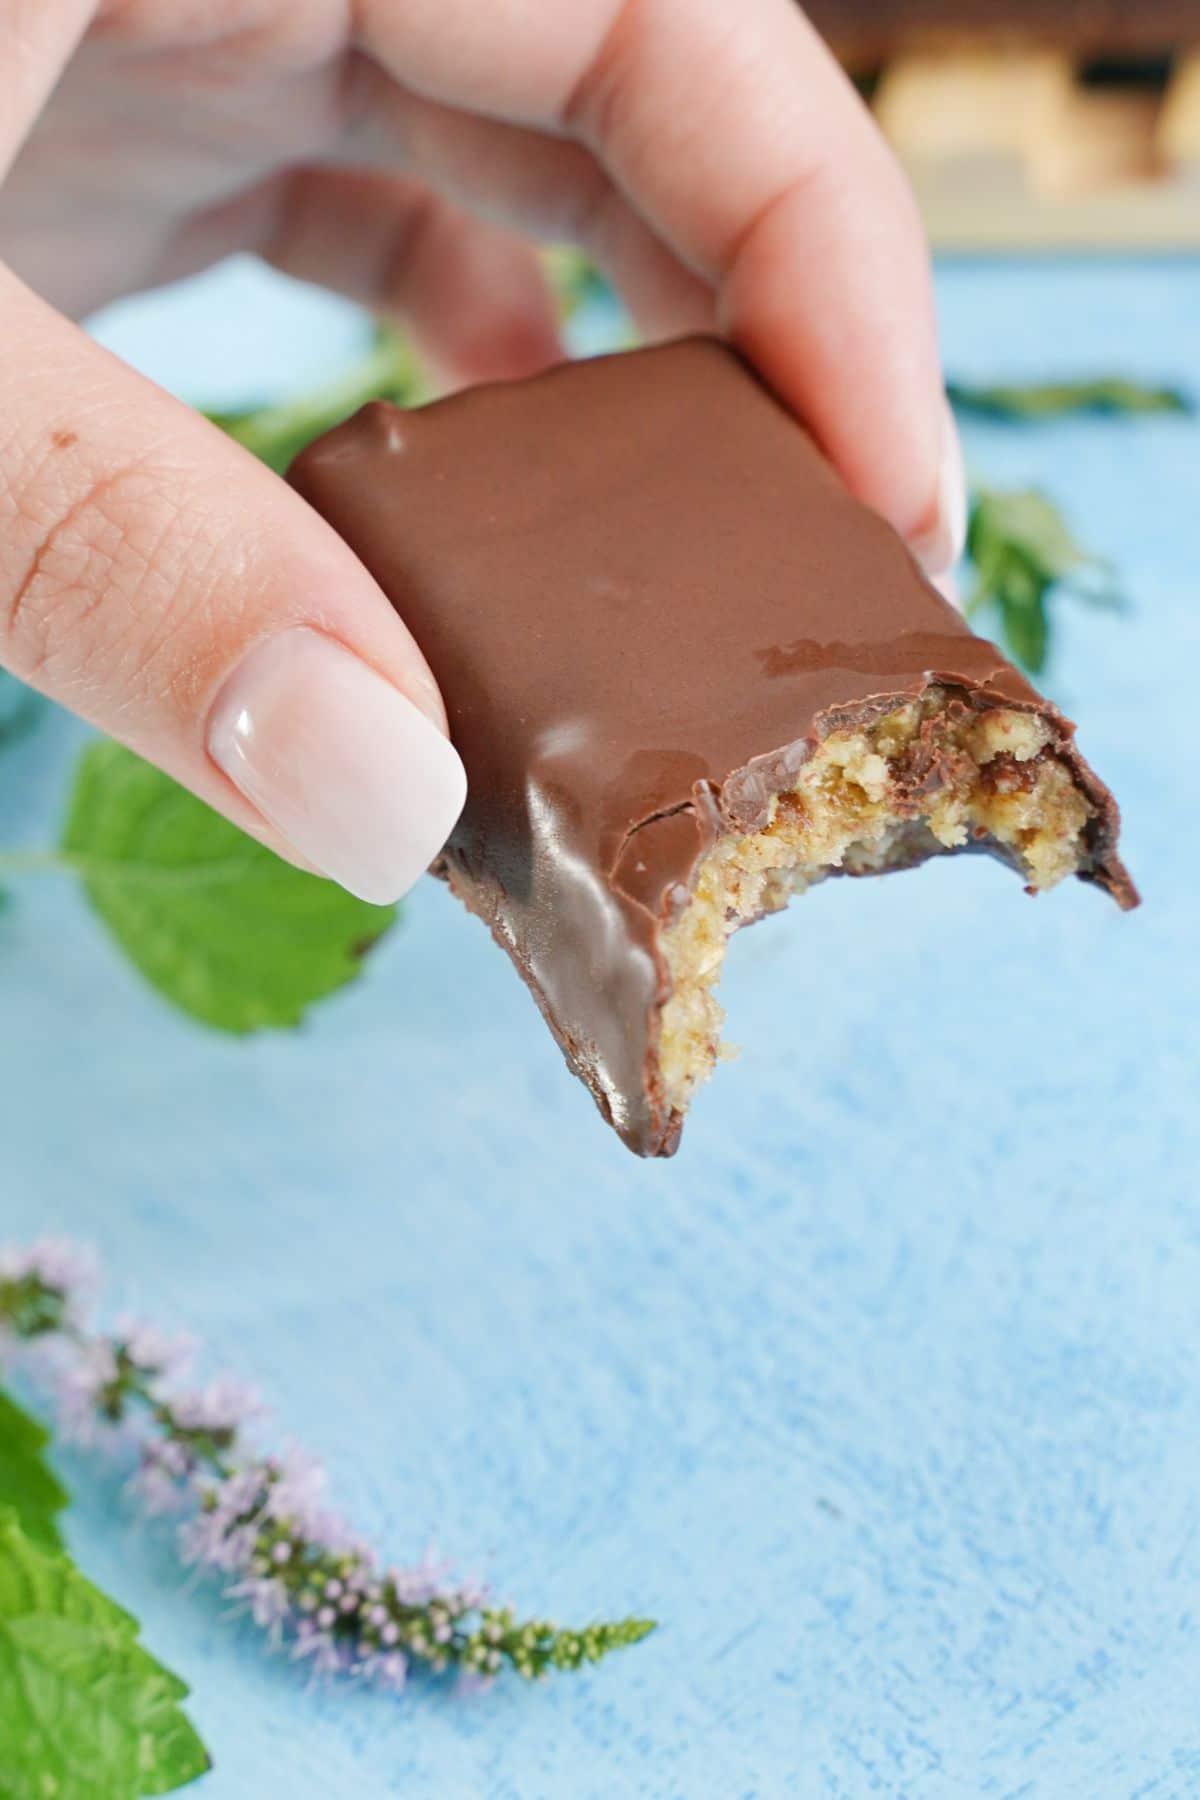 A bite taken from Chocolate Covered Coconut Cashew Bars